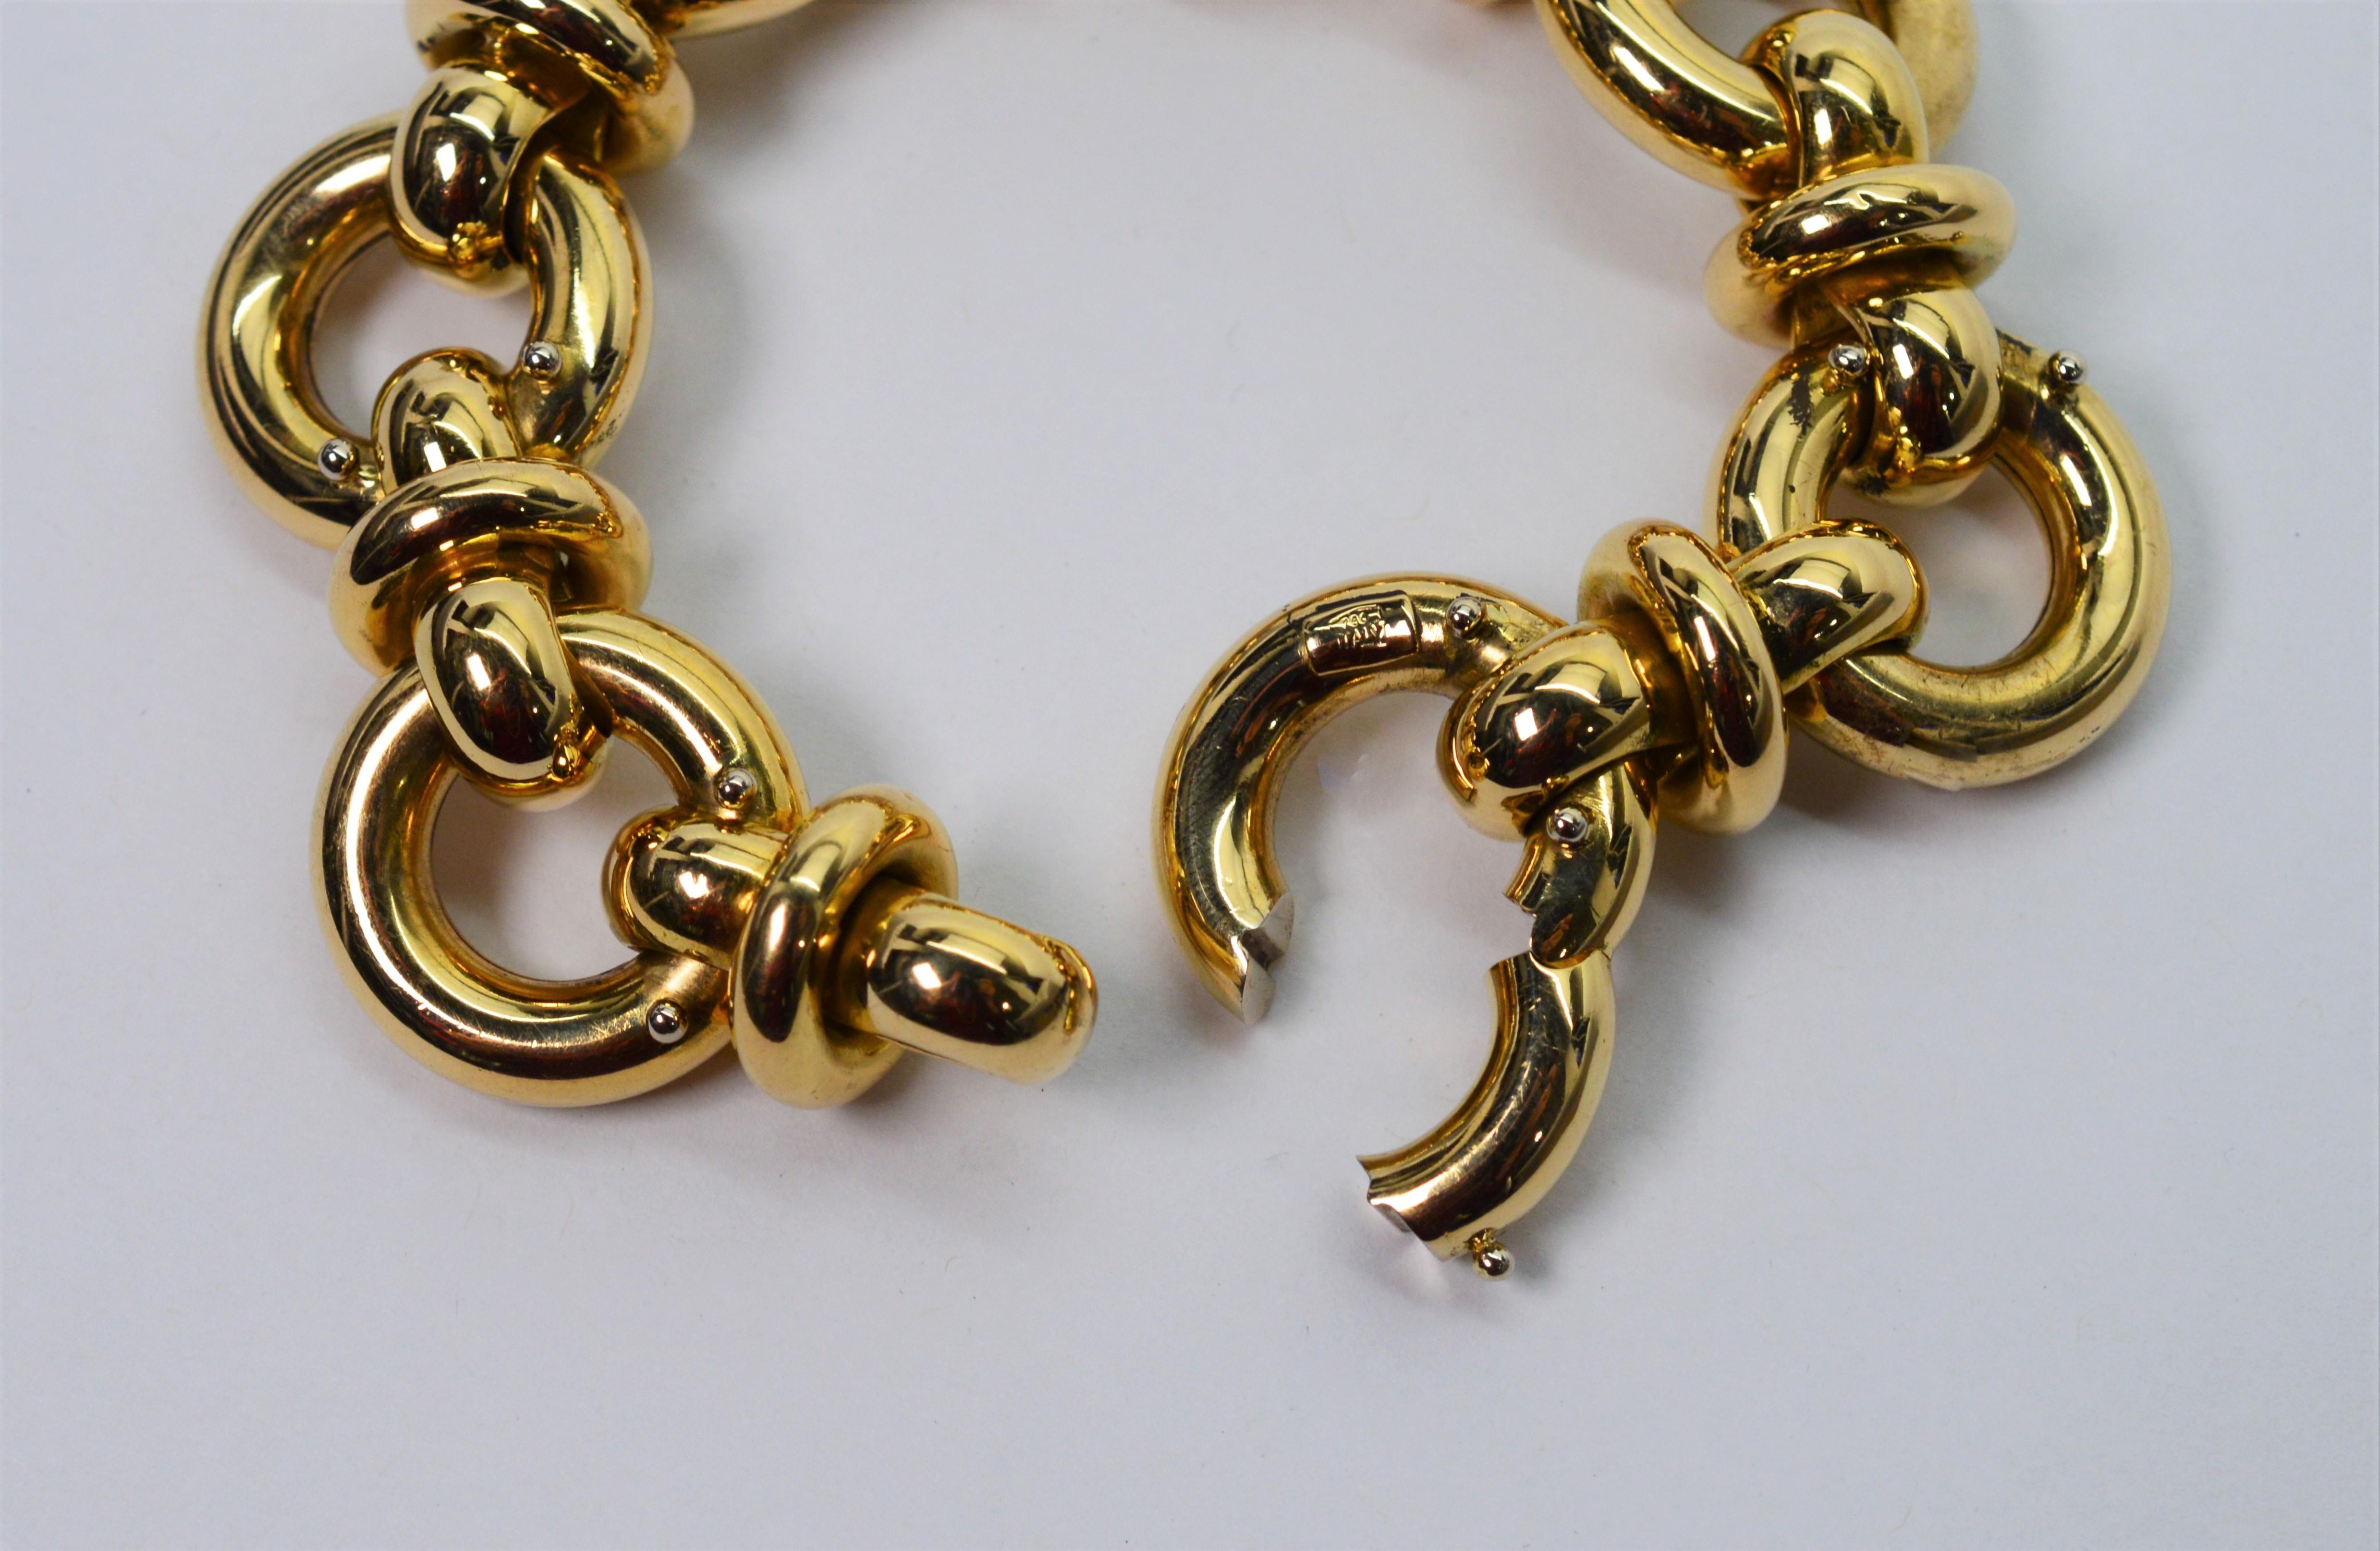 Yellow Gold Wide Round Link Chain Statement Bracelet In Good Condition For Sale In Mount Kisco, NY